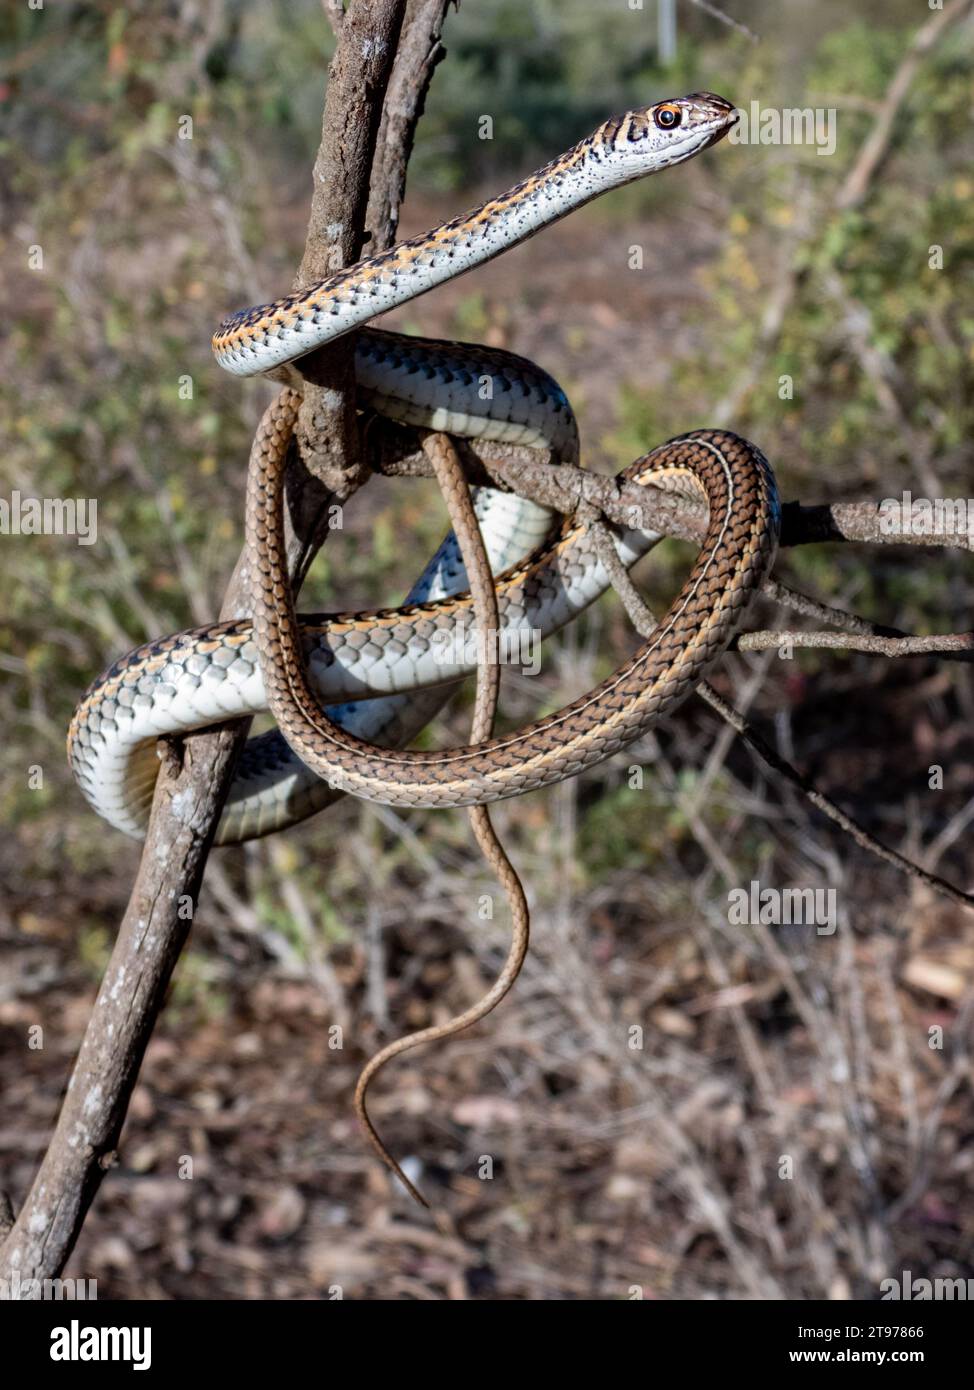 A close-up shot of a Cape Sand Snake coiled around a tree branch, resting on a larger branch Stock Photo